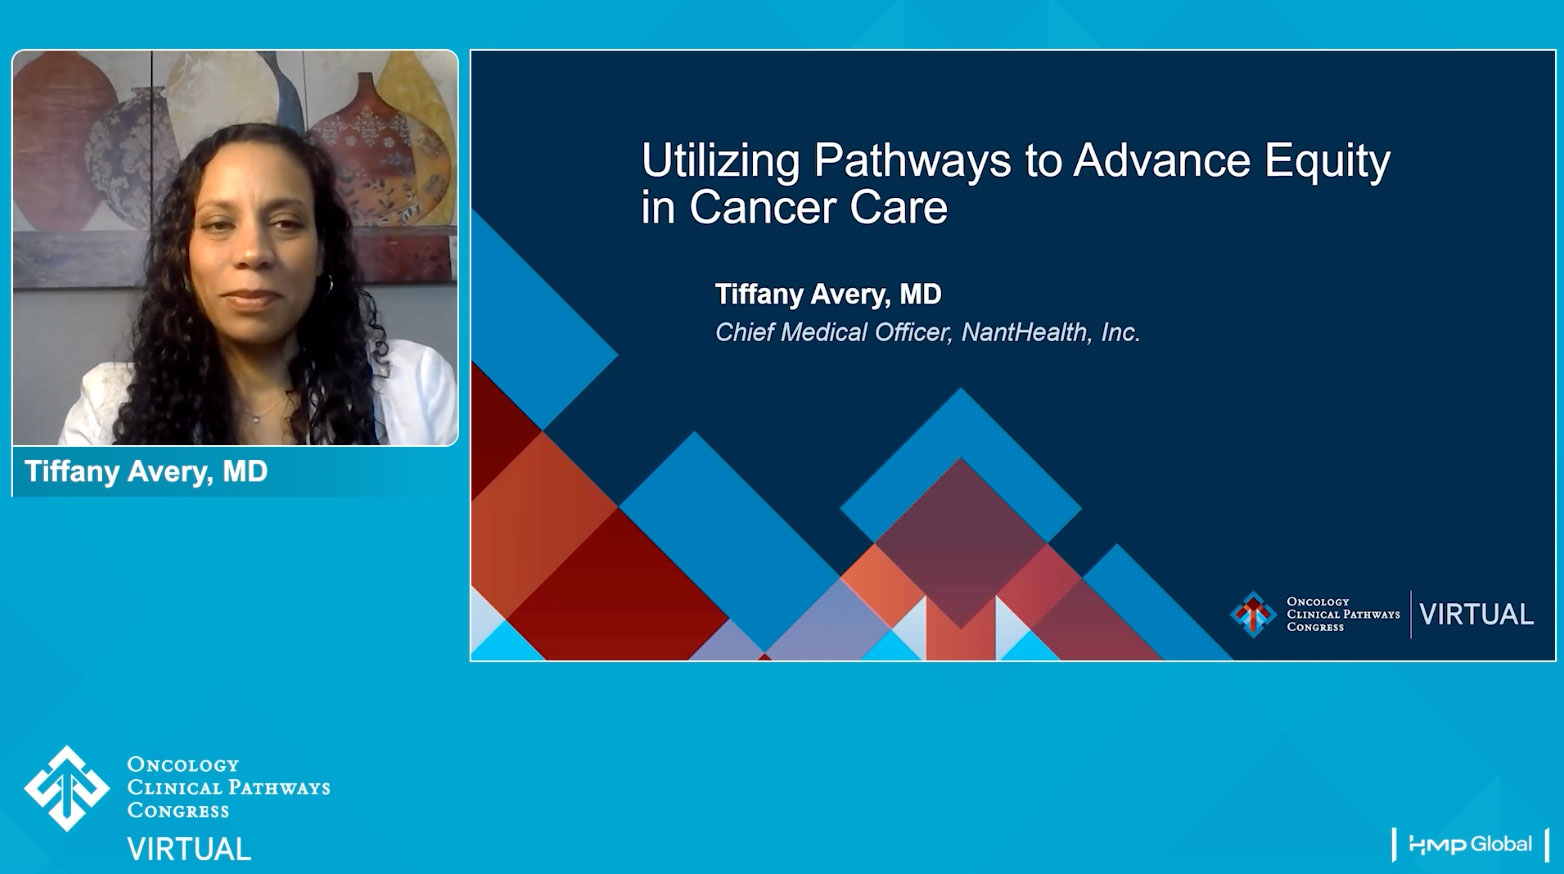 Dr. Tiffany Avery NantHealth’s Chief Medical Officer talks at Oncology Clinical Pathways Congress